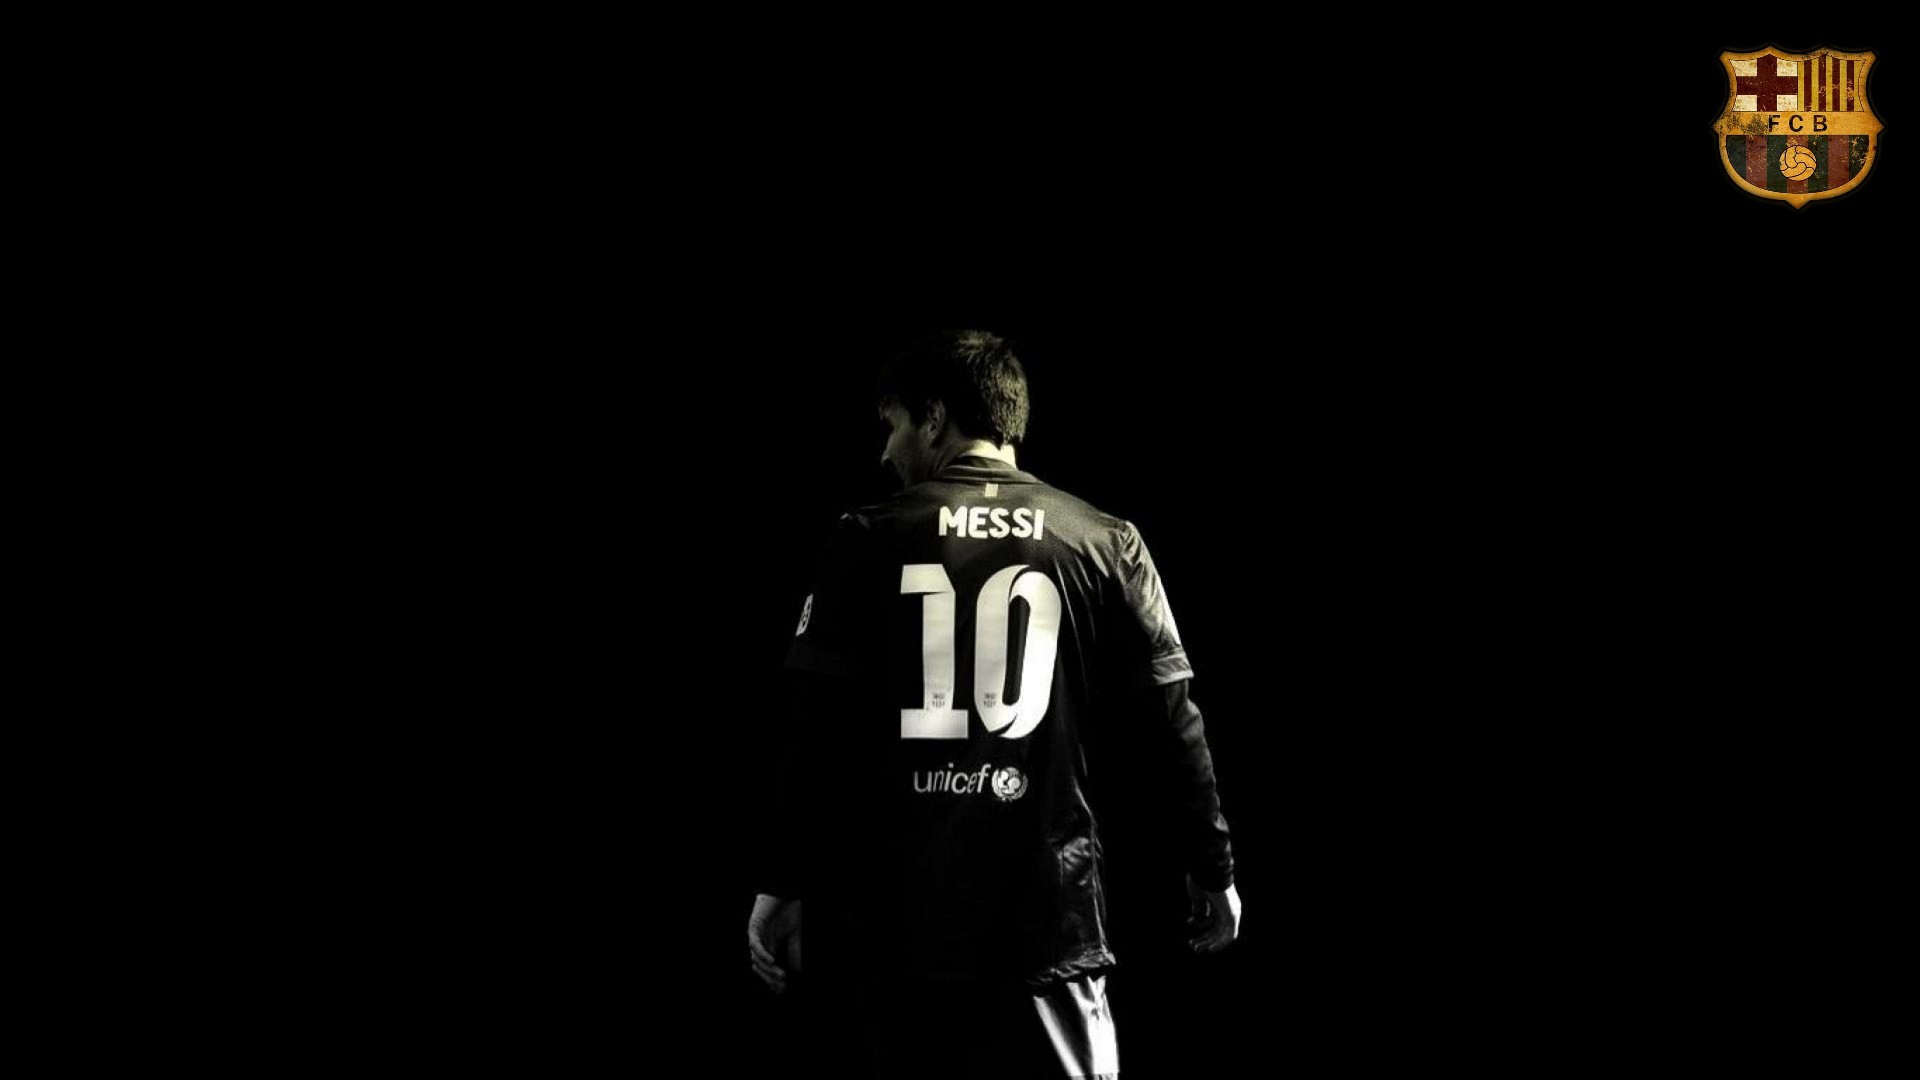 Lionel Messi Backgrounds HD With Resolution 1920X1080 pixel. You can make this wallpaper for your Mac or Windows Desktop Background, iPhone, Android or Tablet and another Smartphone device for free